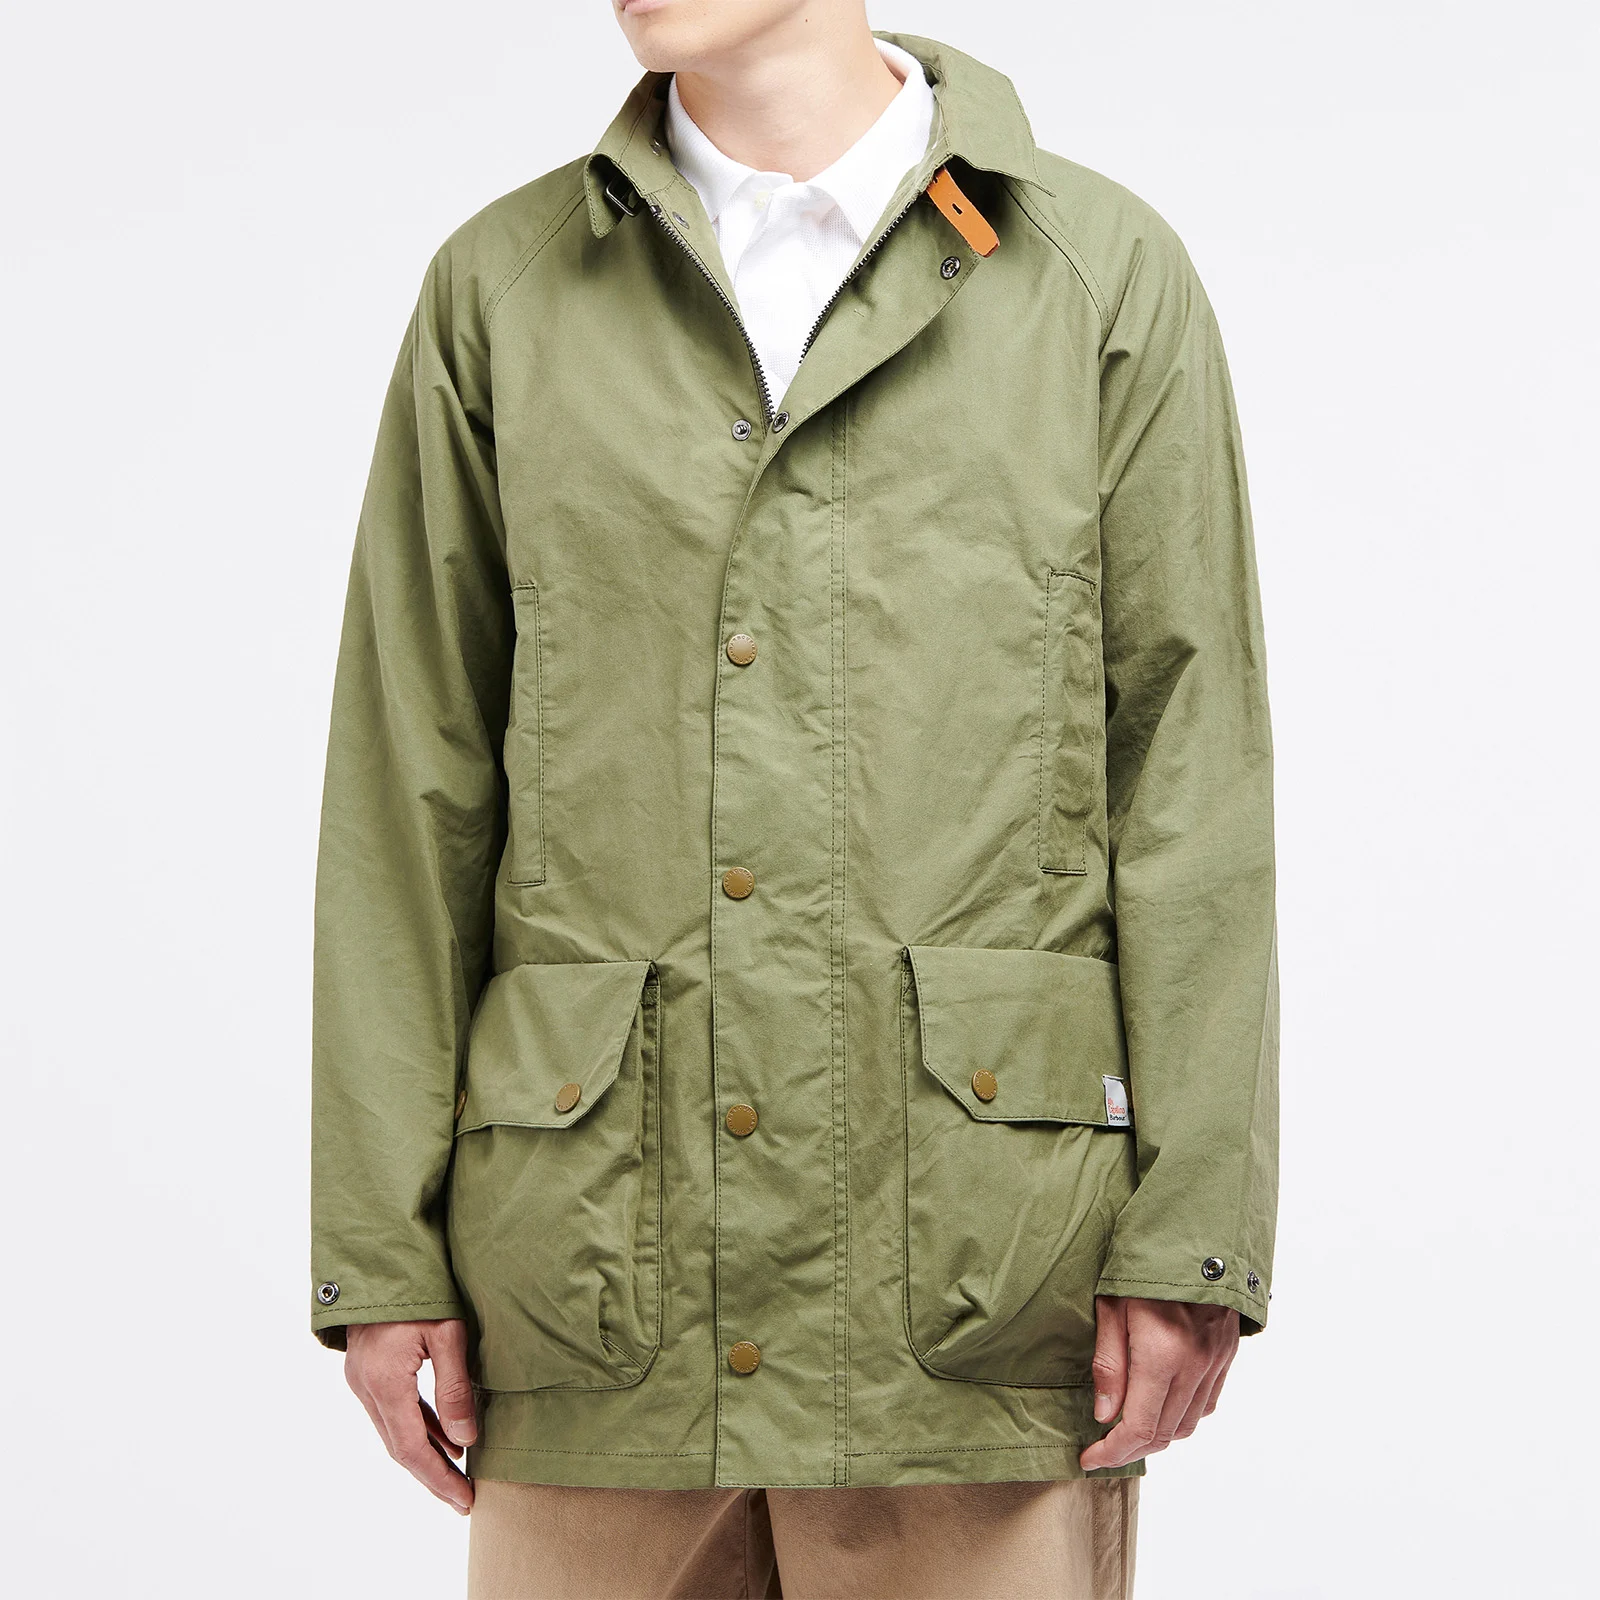 Barbour Heritage X Ally Capellino Men's Back Casual Jacket - Army Green Image 1